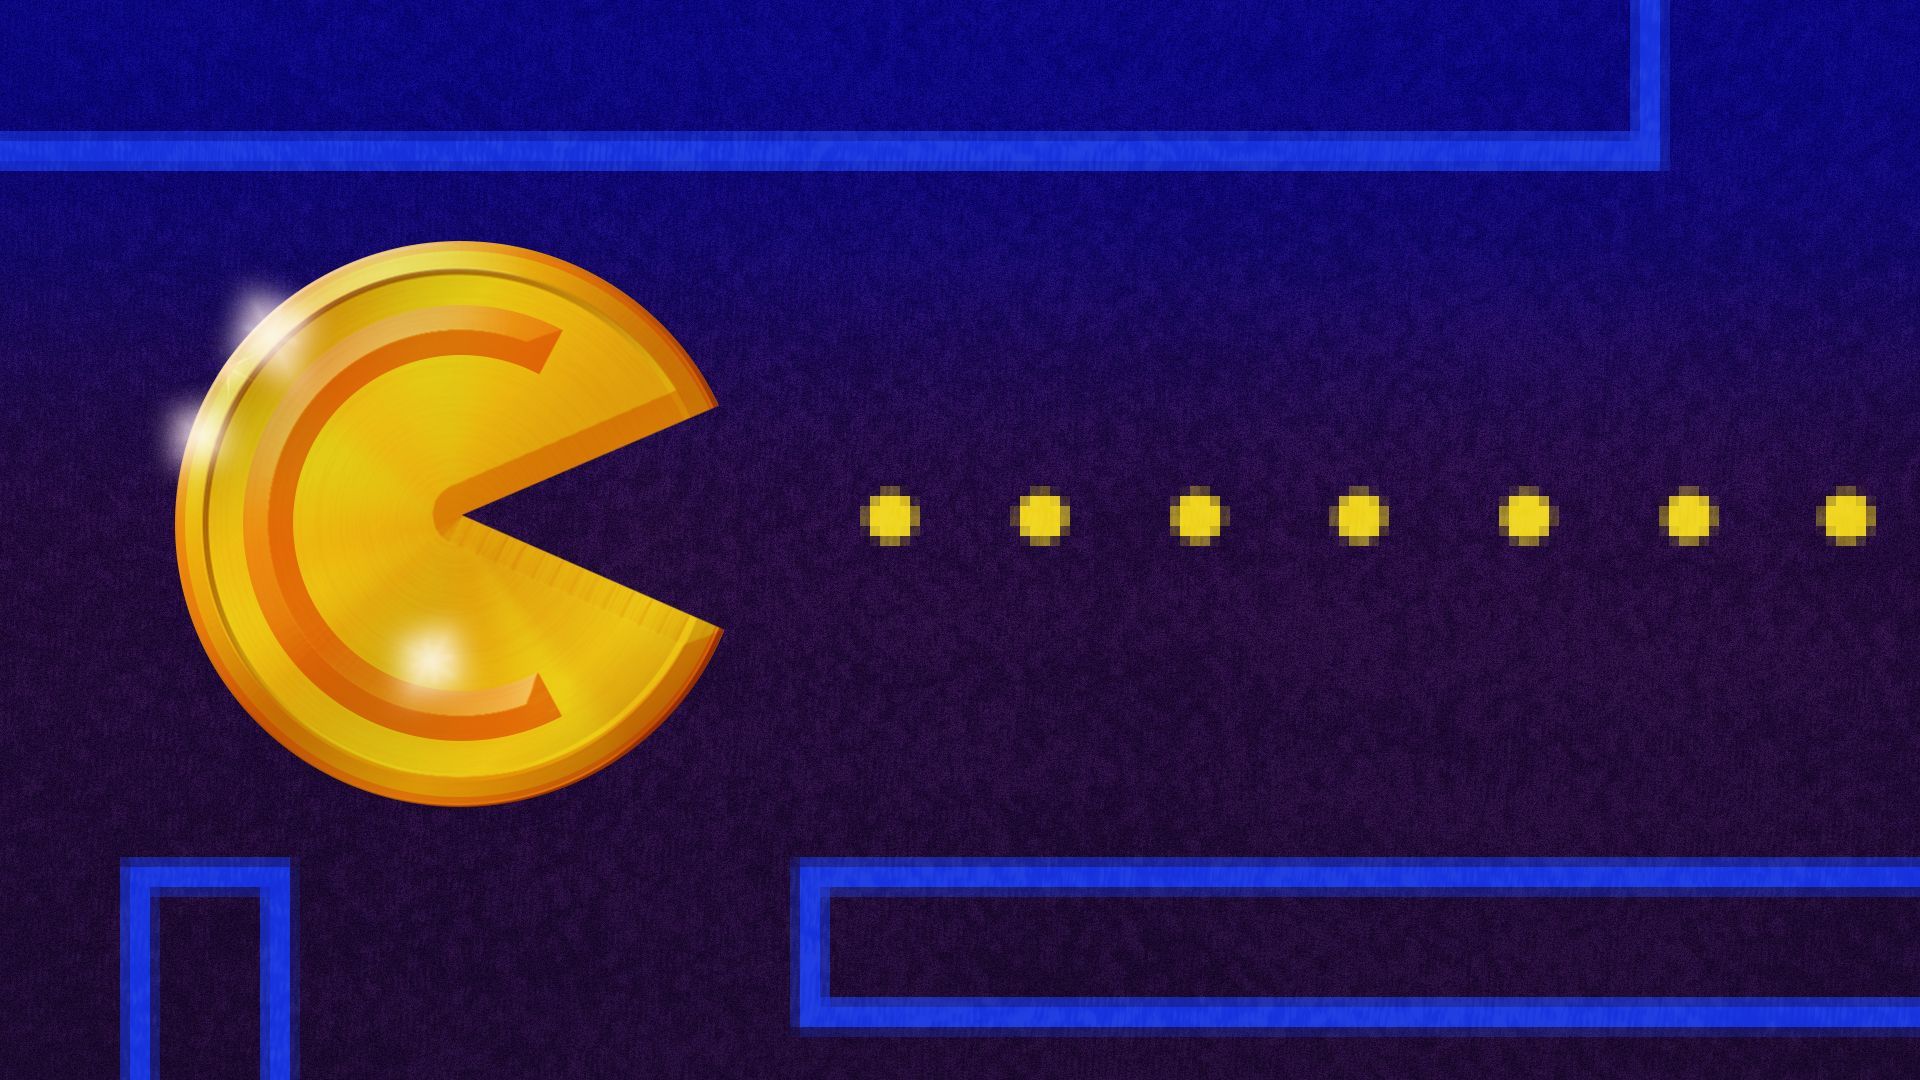 Illustration of a PacMan-like crypto coin in a video game level